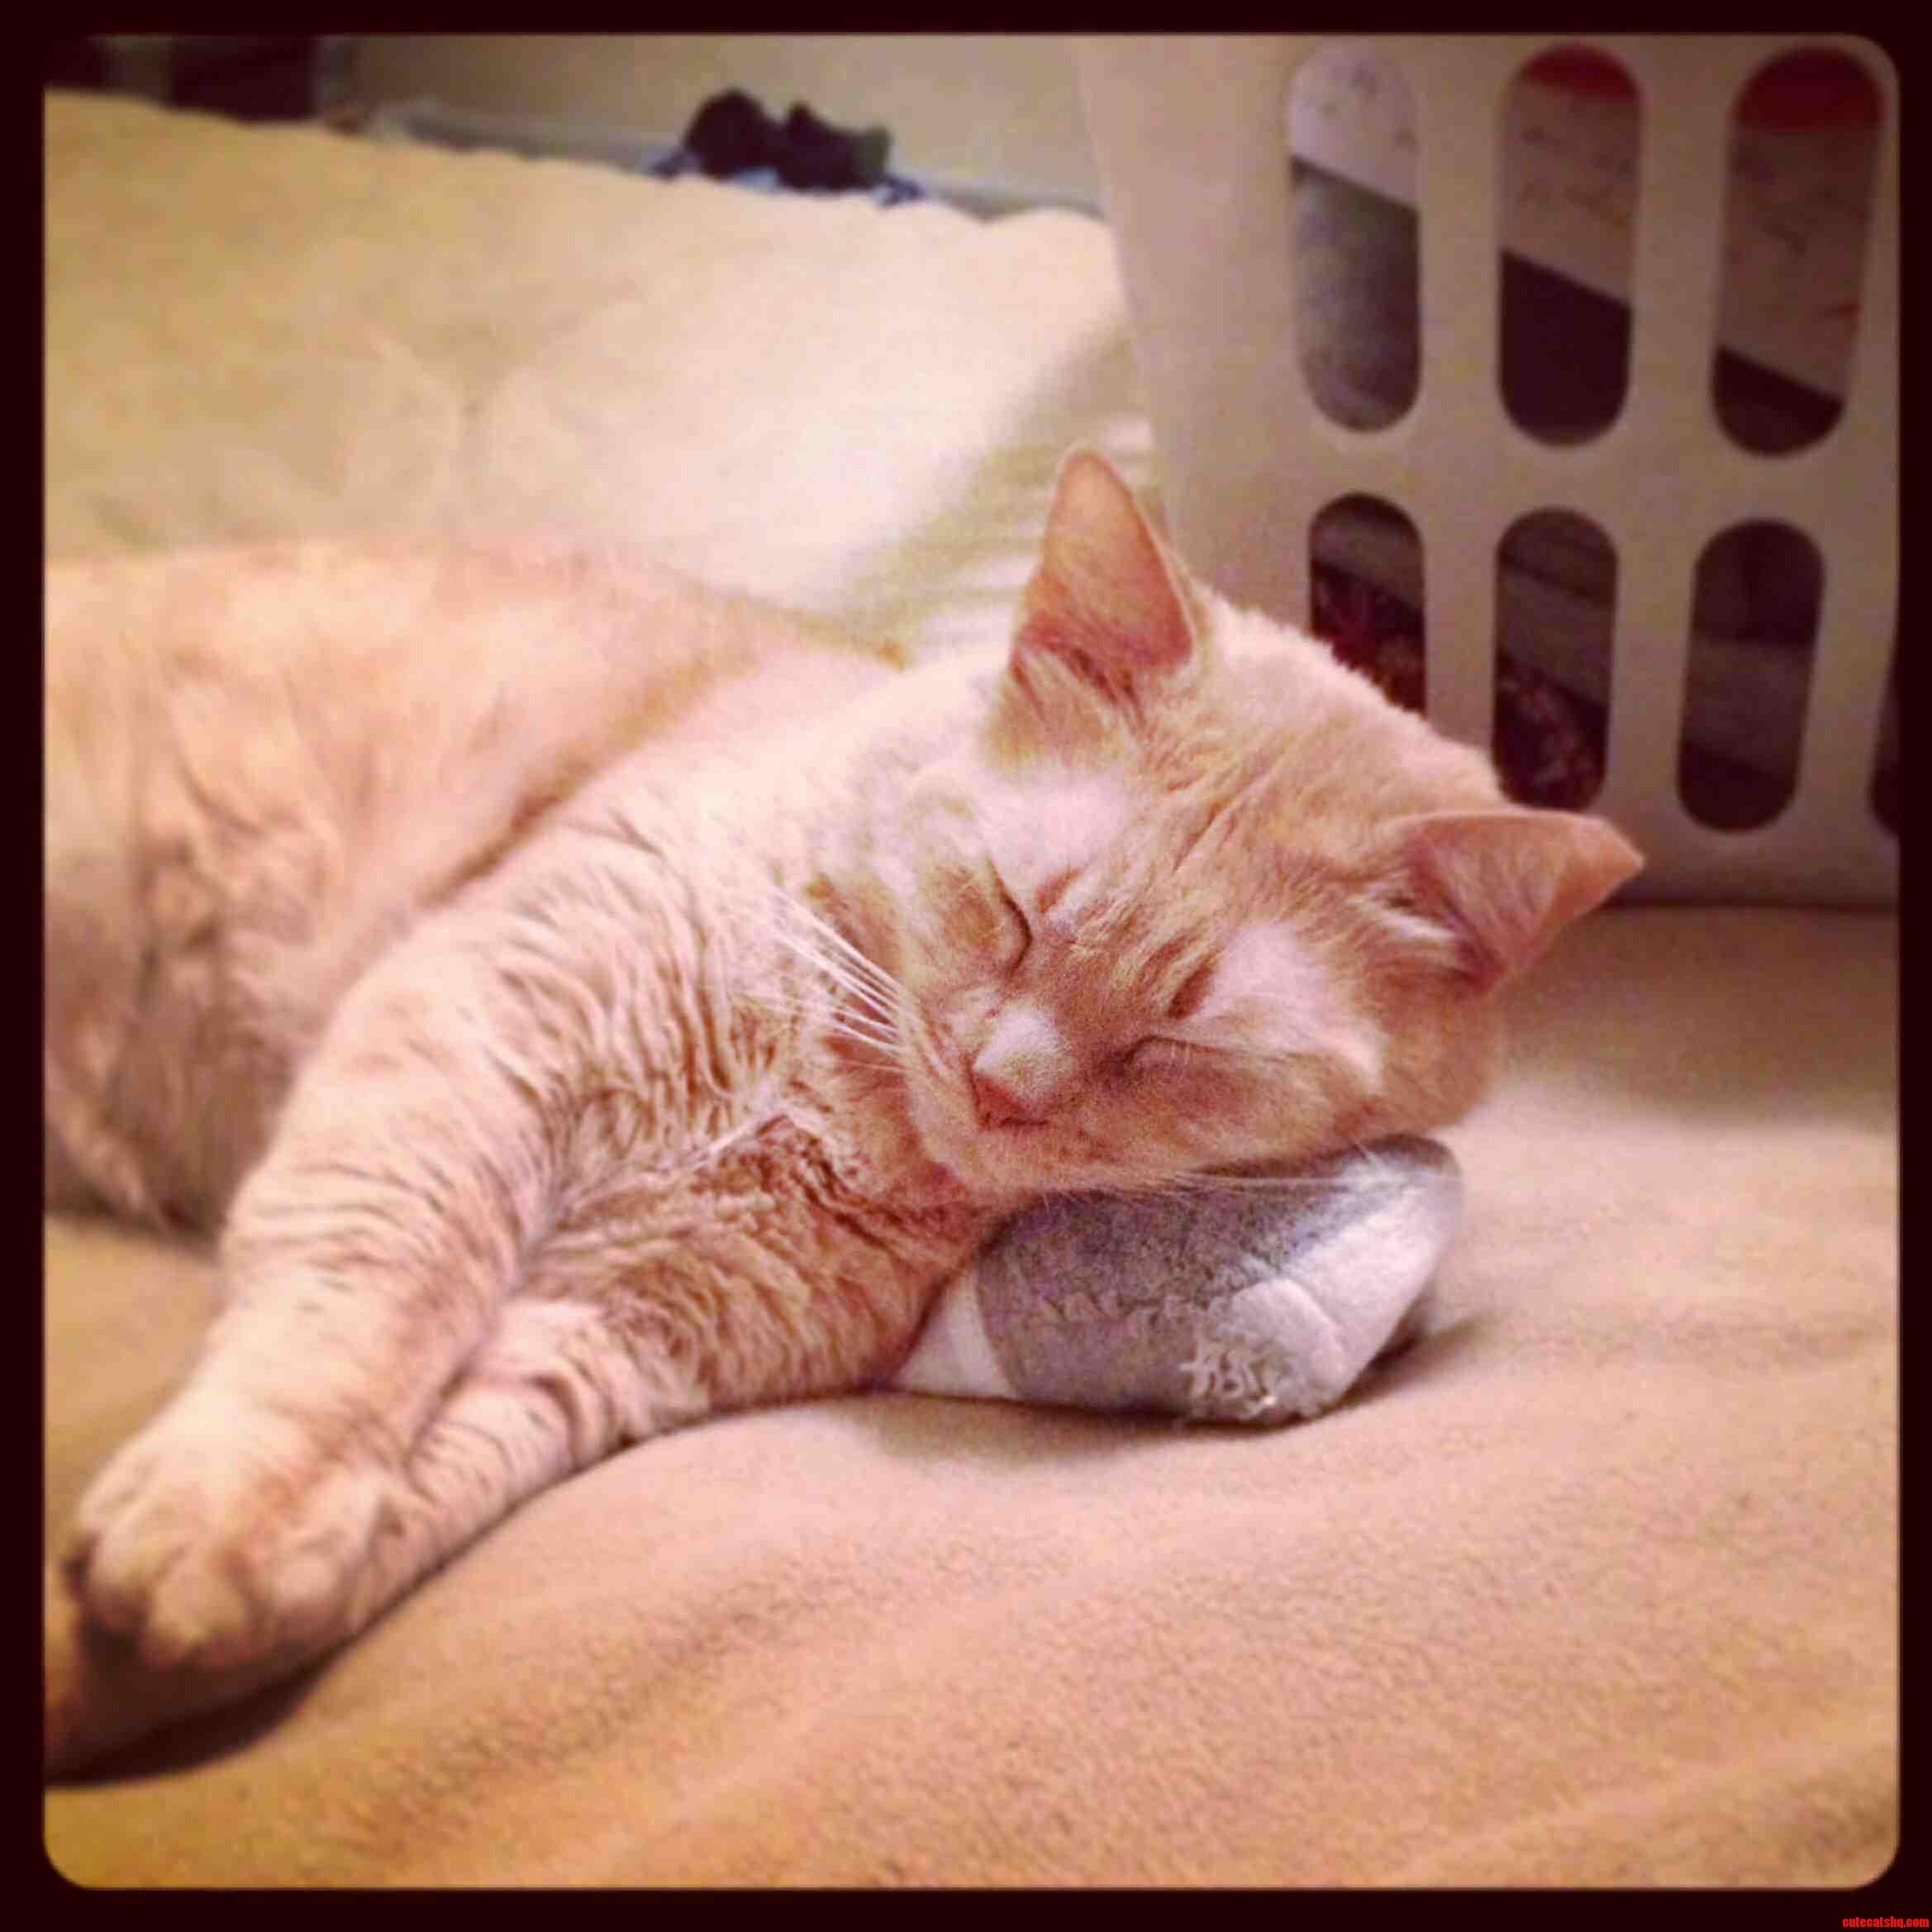 Socks As A Pillow. Hes A Genius